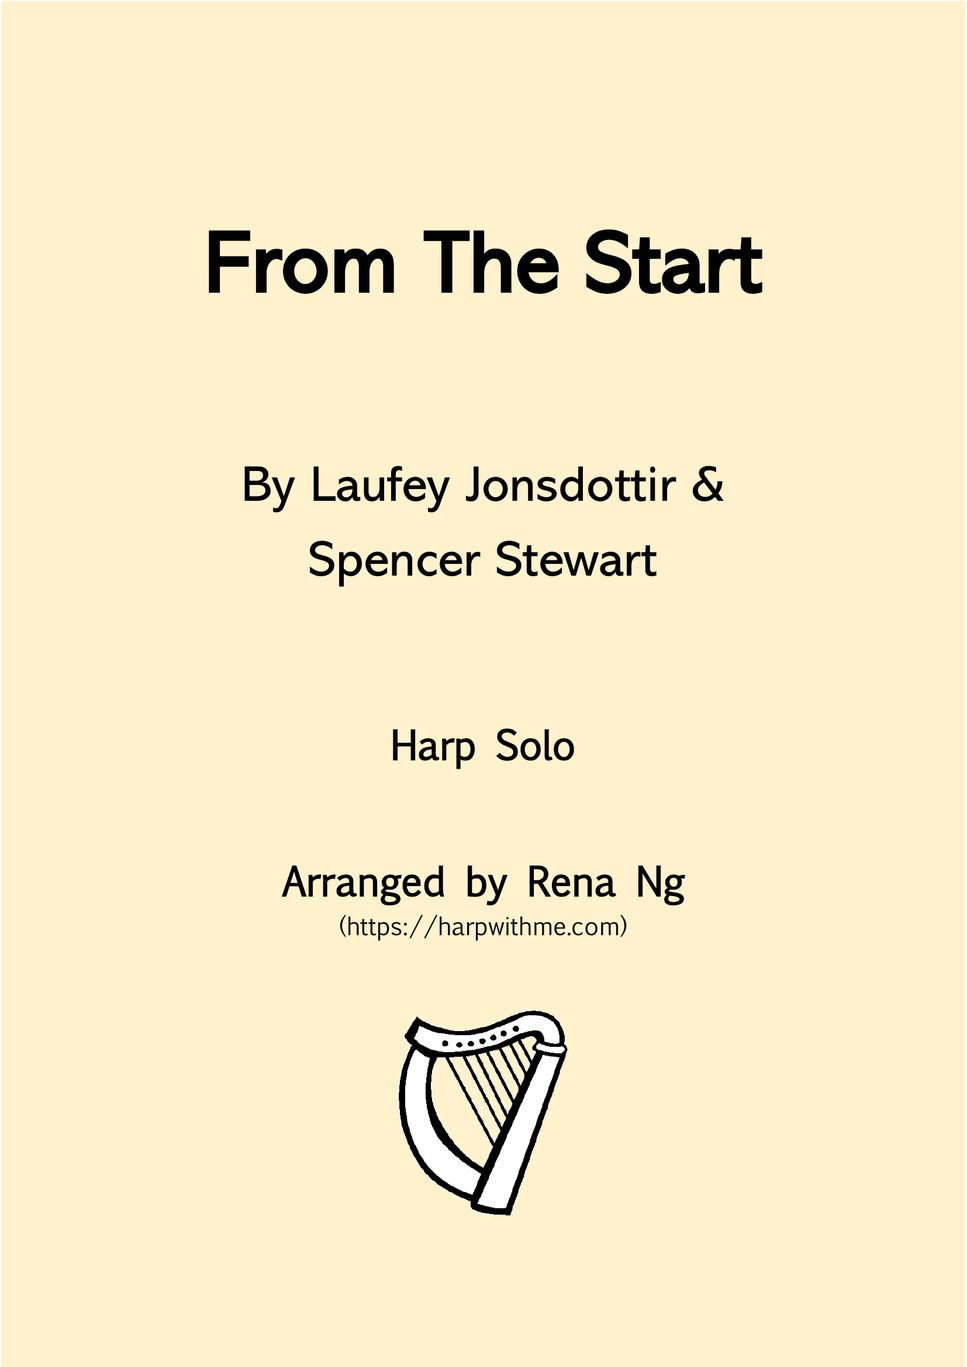 Laufey - From The Start (Harp Solo) by Harp With Me